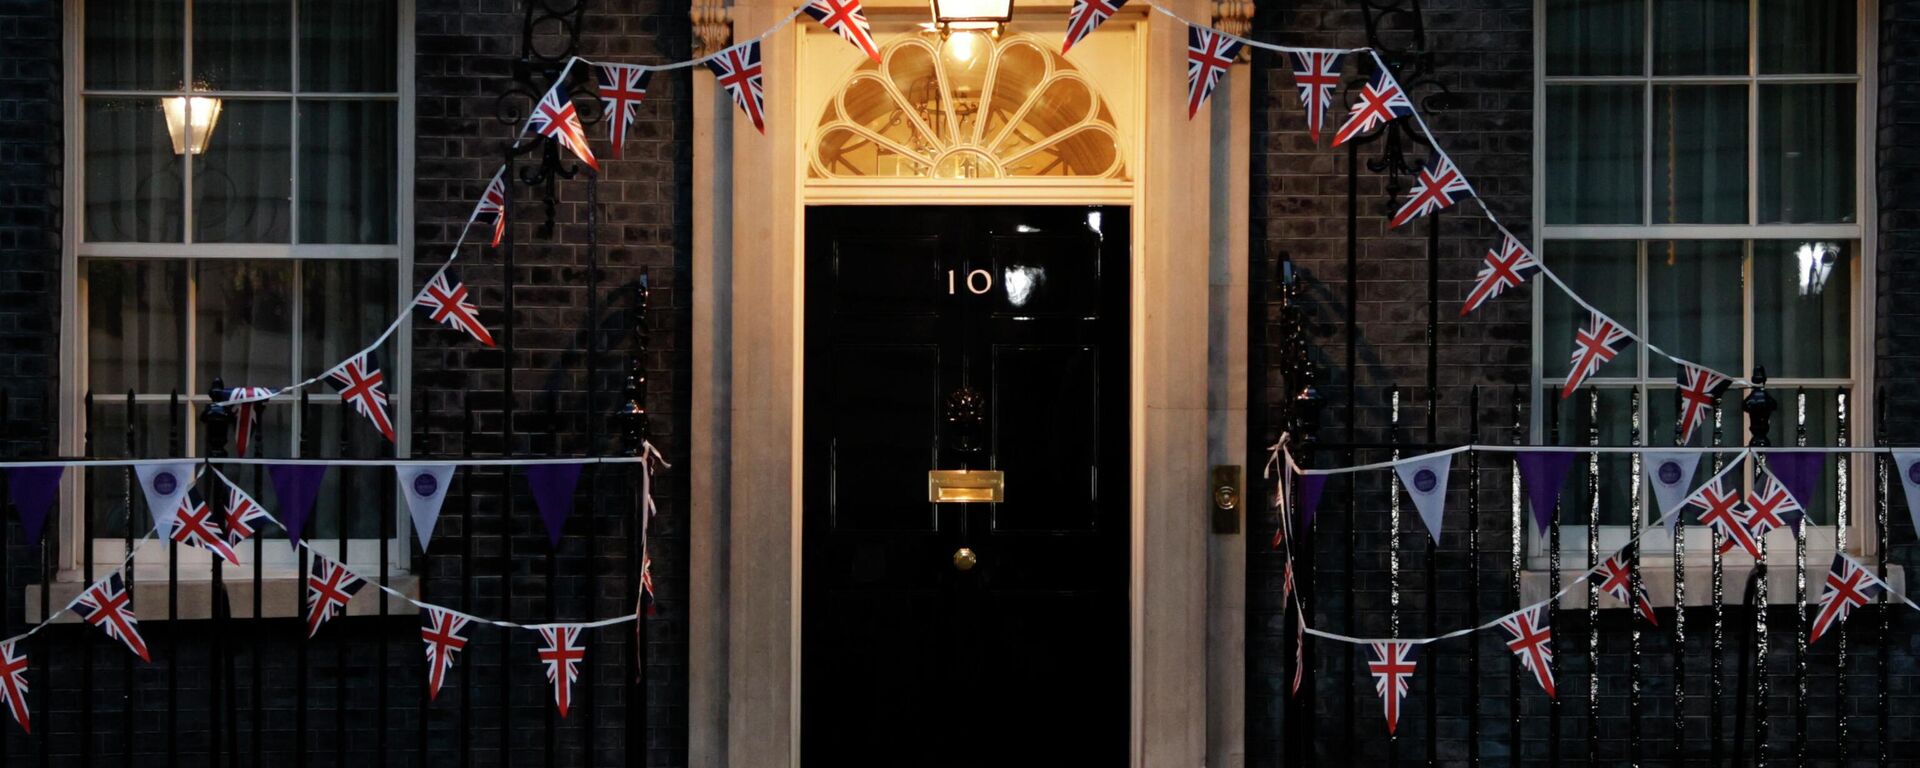 A general view at dusk of 10 Downing Street in London, Monday, June 6, 2022. British Prime Minister Boris Johnson survived a no-confidence vote on Monday, securing enough support from his Conservative Party to remain in office despite a rebellion that leaves him a weakened leader with an uncertain future. - Sputnik International, 1920, 06.07.2022